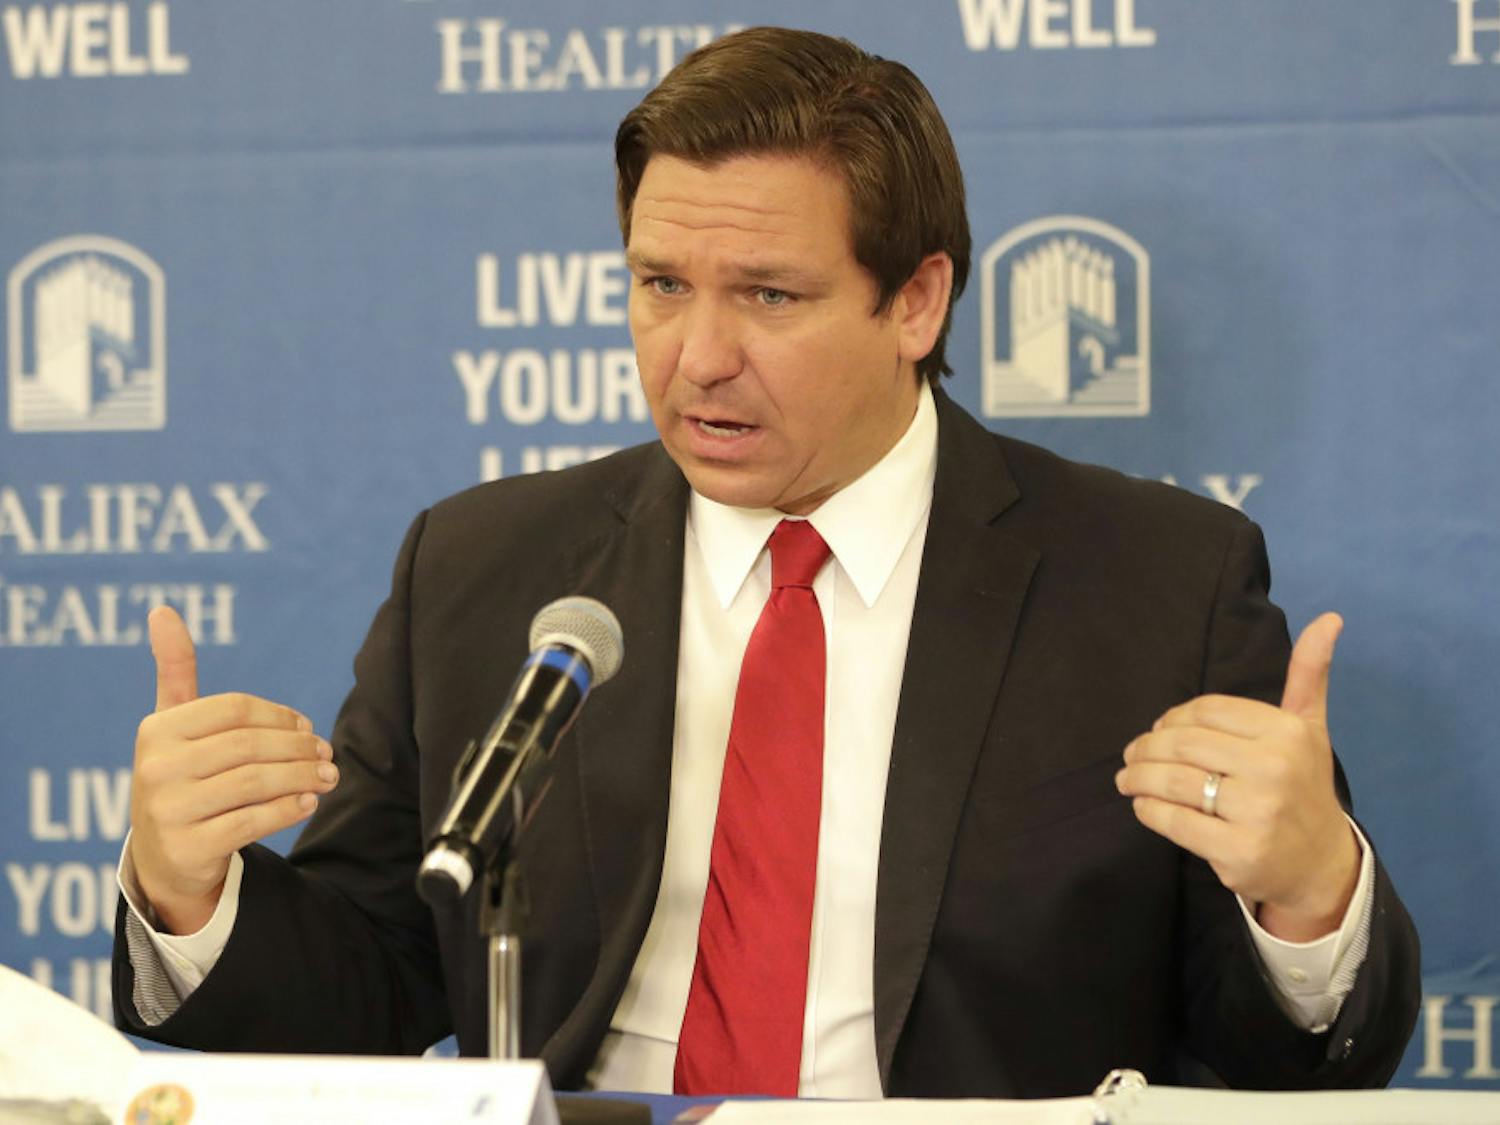 Florida Gov. Ron DeSantis speaks at a news conference at Halifax Health Medical Center Sunday, May 3, 2020, in Daytona Beach, Fla. Business owners across much of Florida were busy Sunday preparing to reopen Monday under new restrictions. Gov. Ron DeSantis said he’s deliberately taking things slowly during re-opening. (AP Photo/John Raoux)